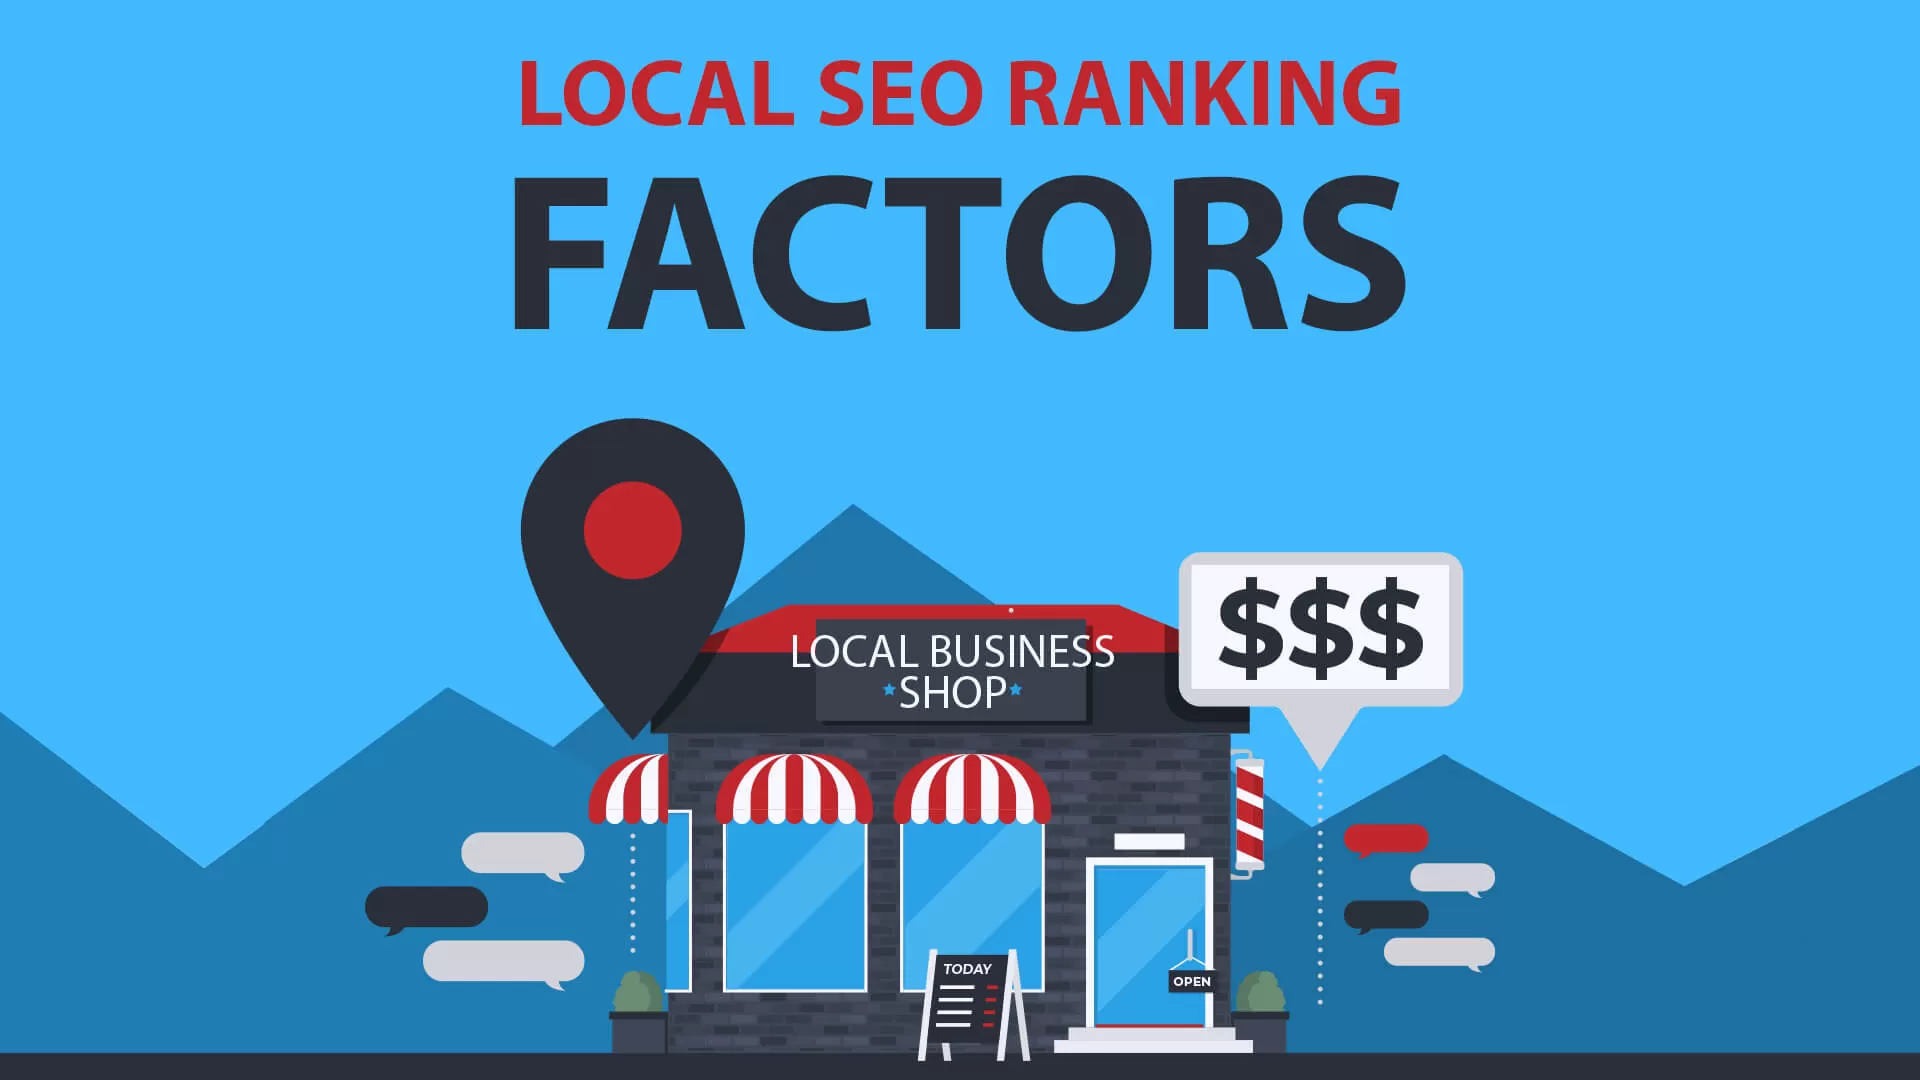 Words local seo ranking factors, a shop, map pin, and dollar signs